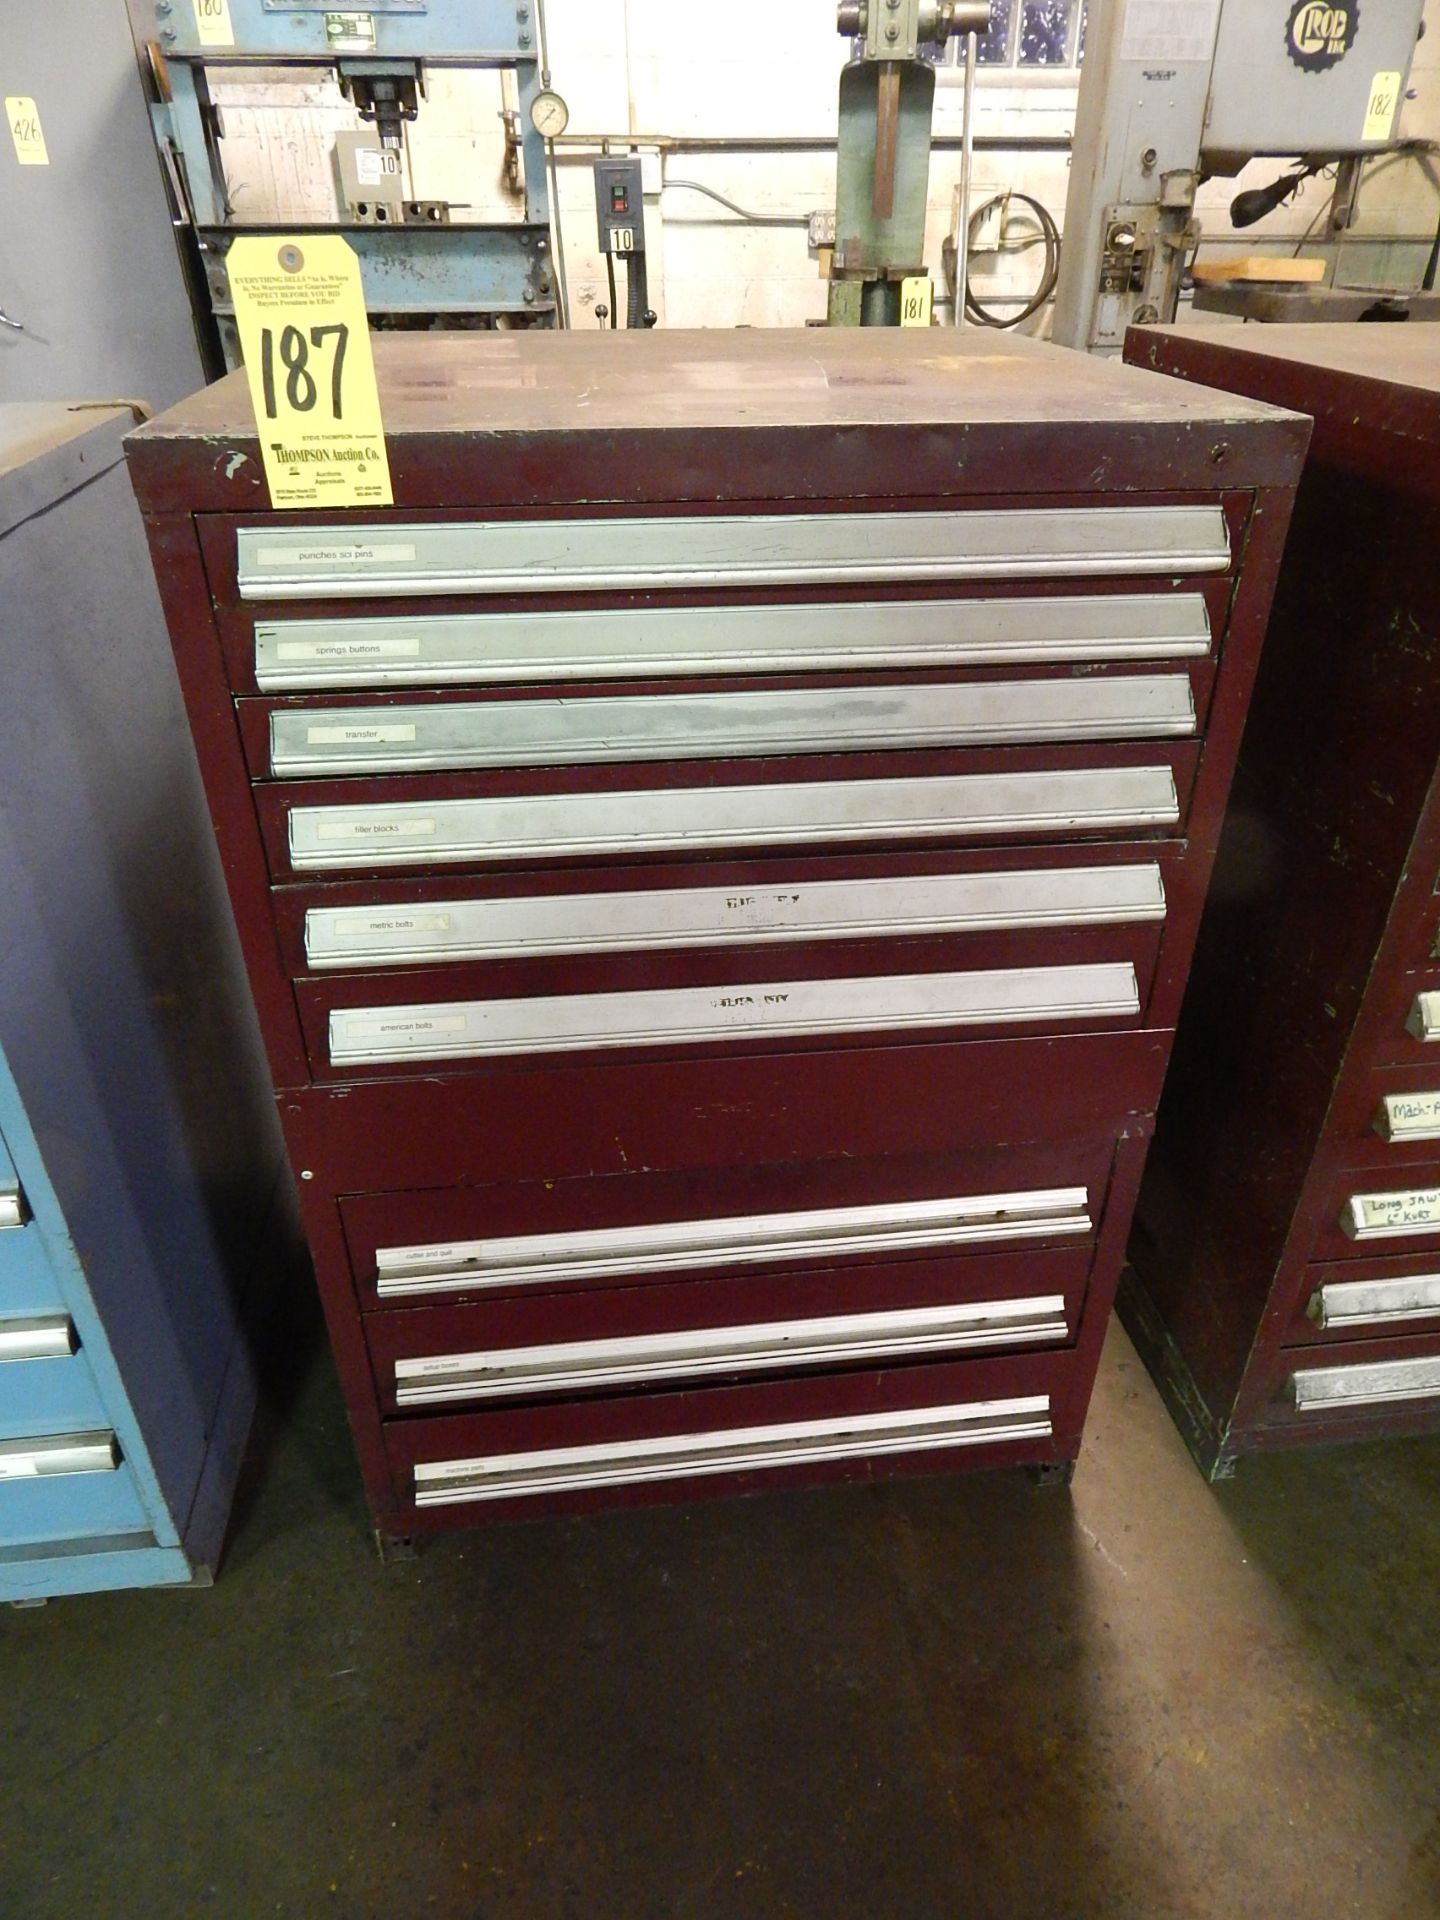 9 Drawer Tooling Cabinet, 44 1/2 In. Tall, 30 In. Wide, 27 3/4 In. Deep, Loading Fee $50.00 - Image 2 of 6